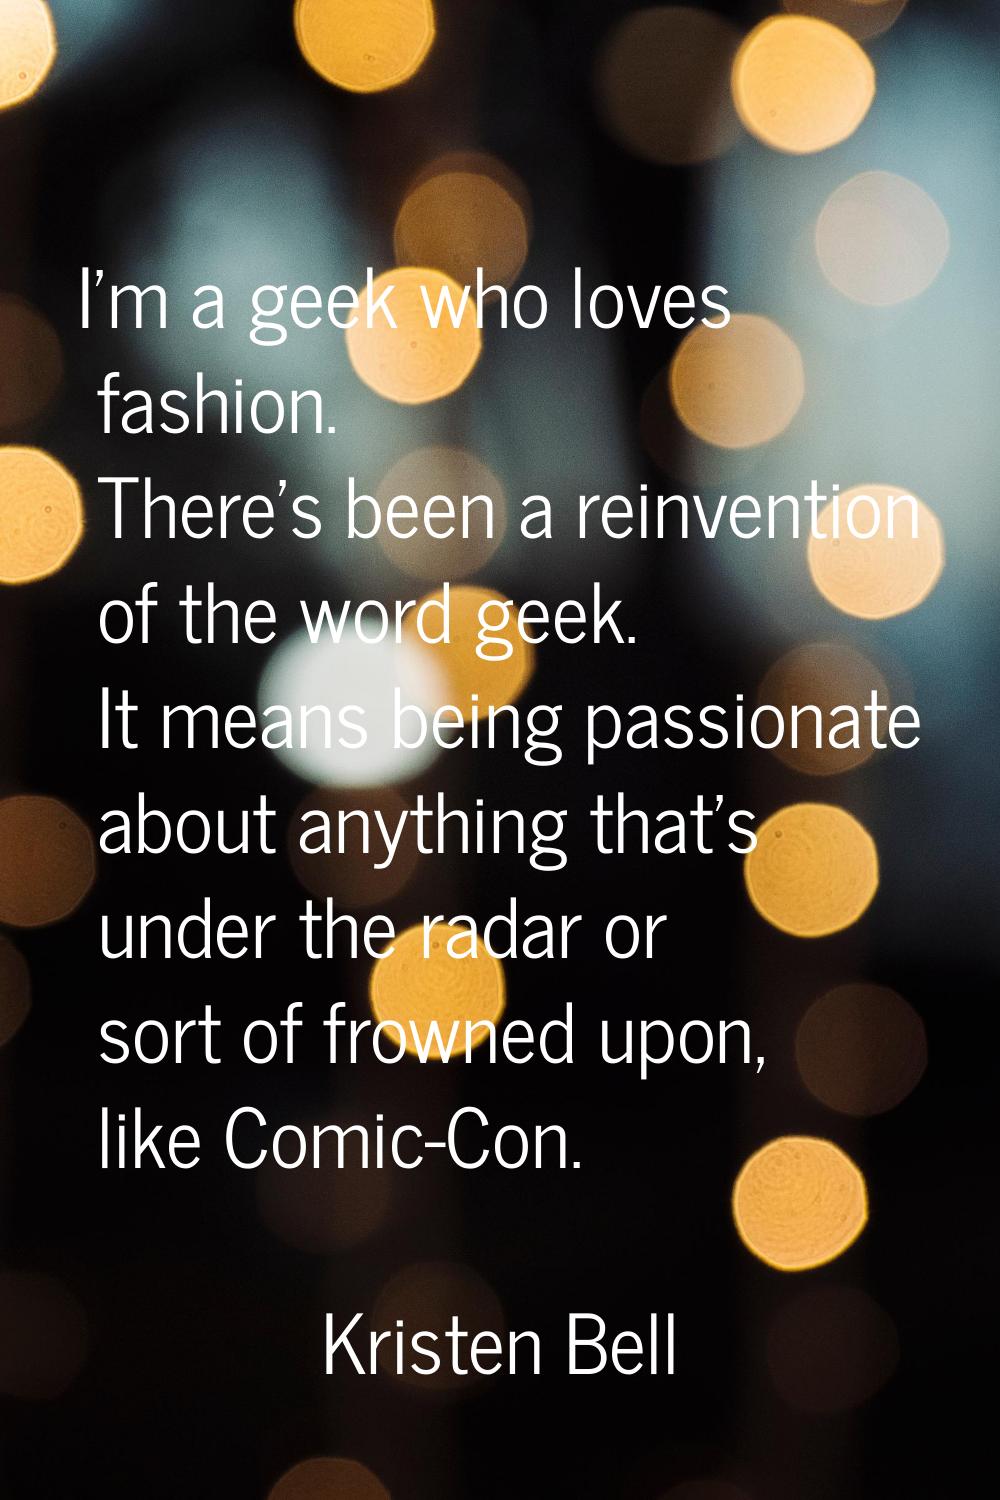 I'm a geek who loves fashion. There's been a reinvention of the word geek. It means being passionat